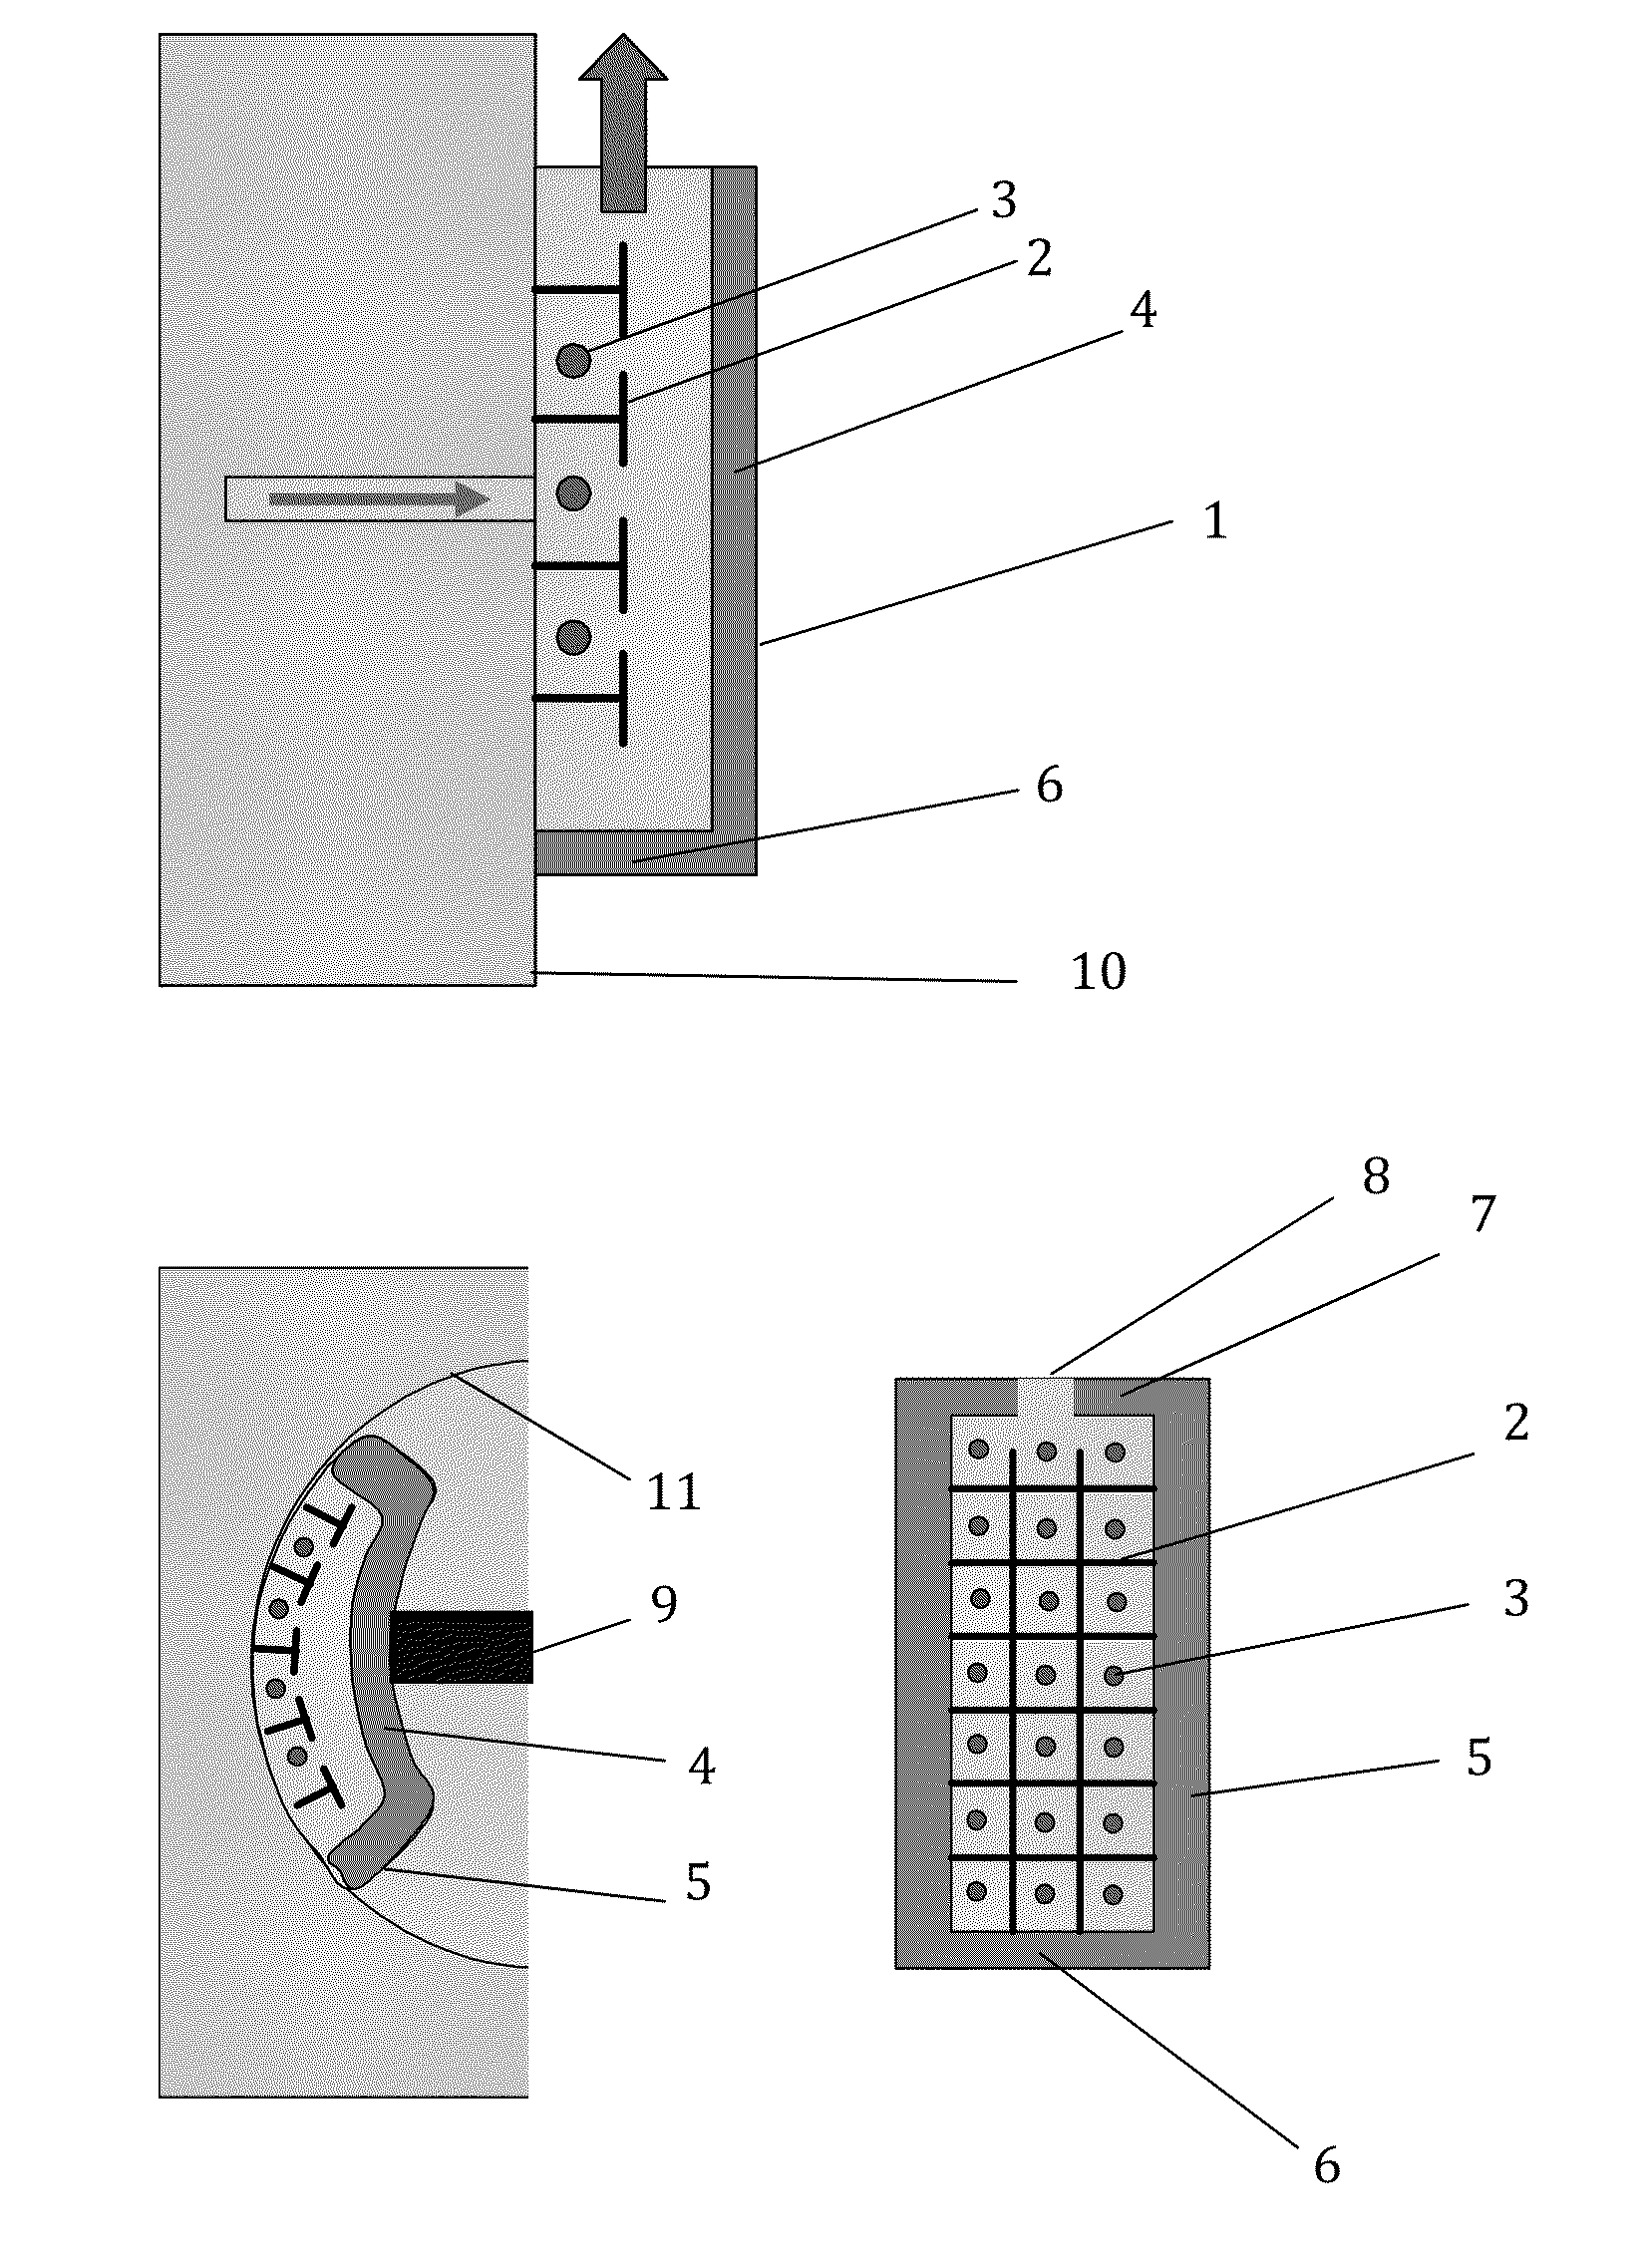 Method for determining the profile of an inflow and the parameters of a well-surrounding area in a multipay well